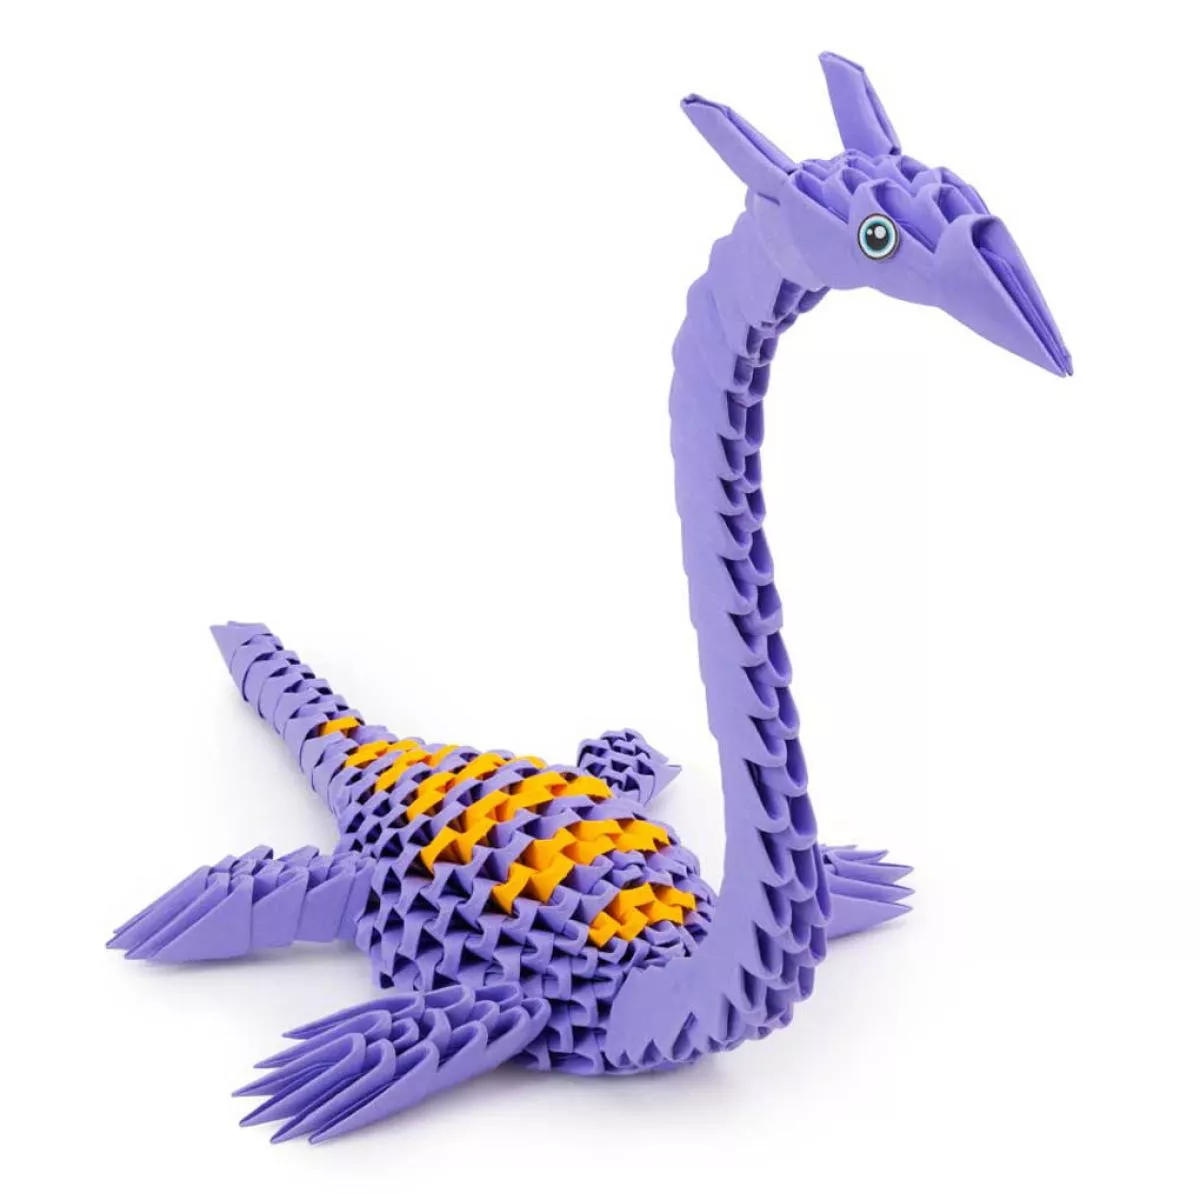 Origami 3D Folding Puzzle "Dinosaur" made of Paper